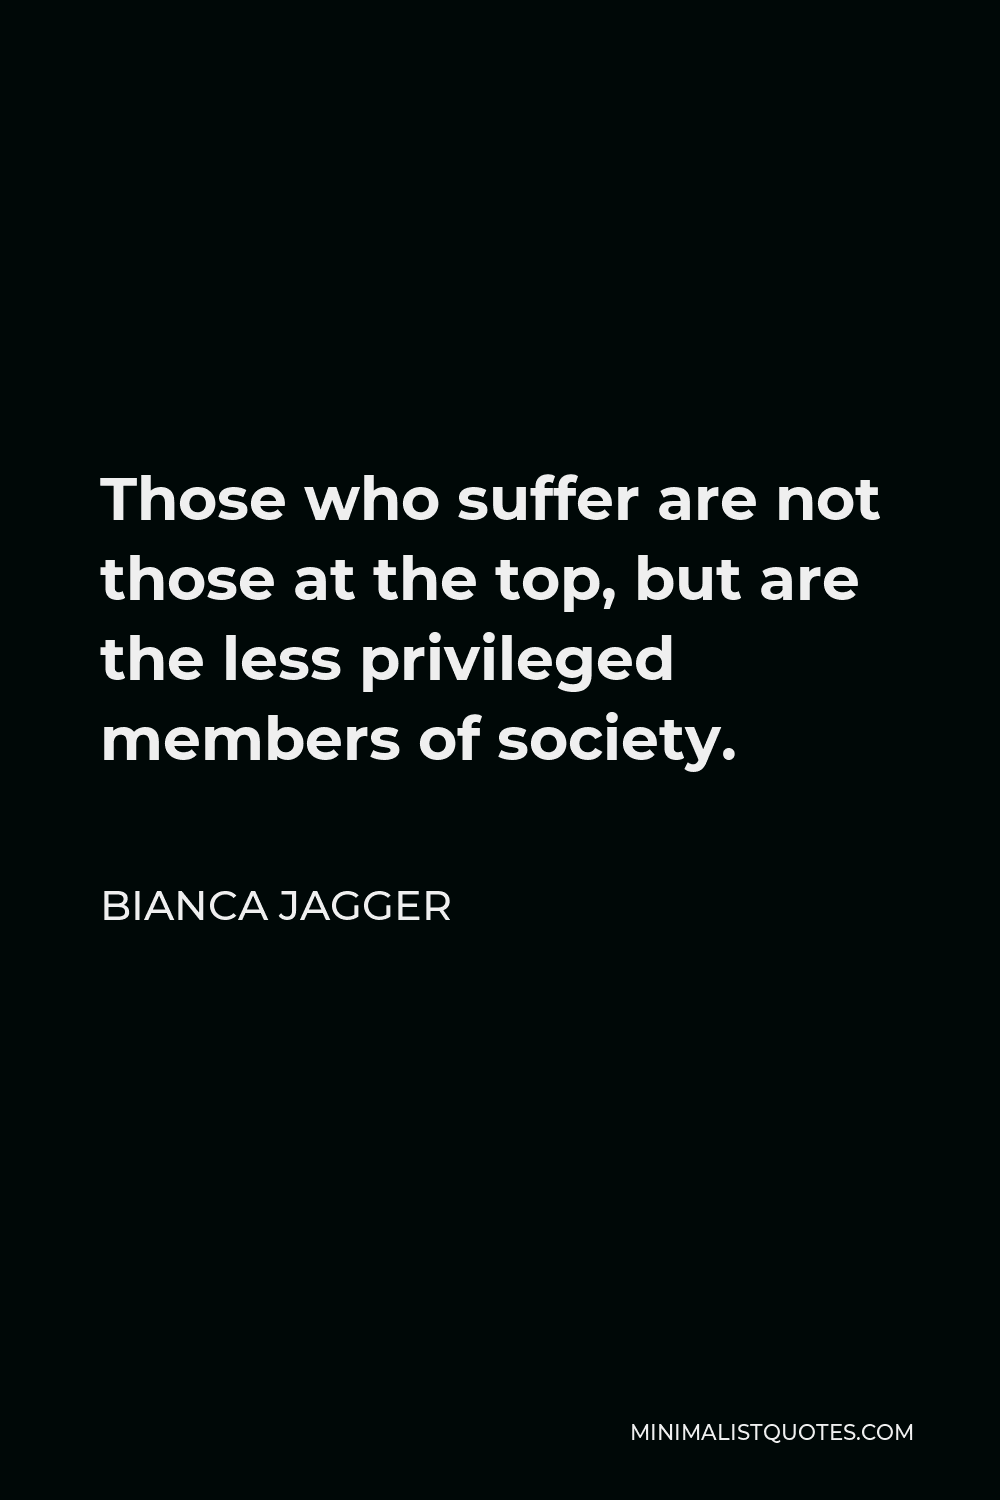 Bianca Jagger Quote - Those who suffer are not those at the top, but are the less privileged members of society.